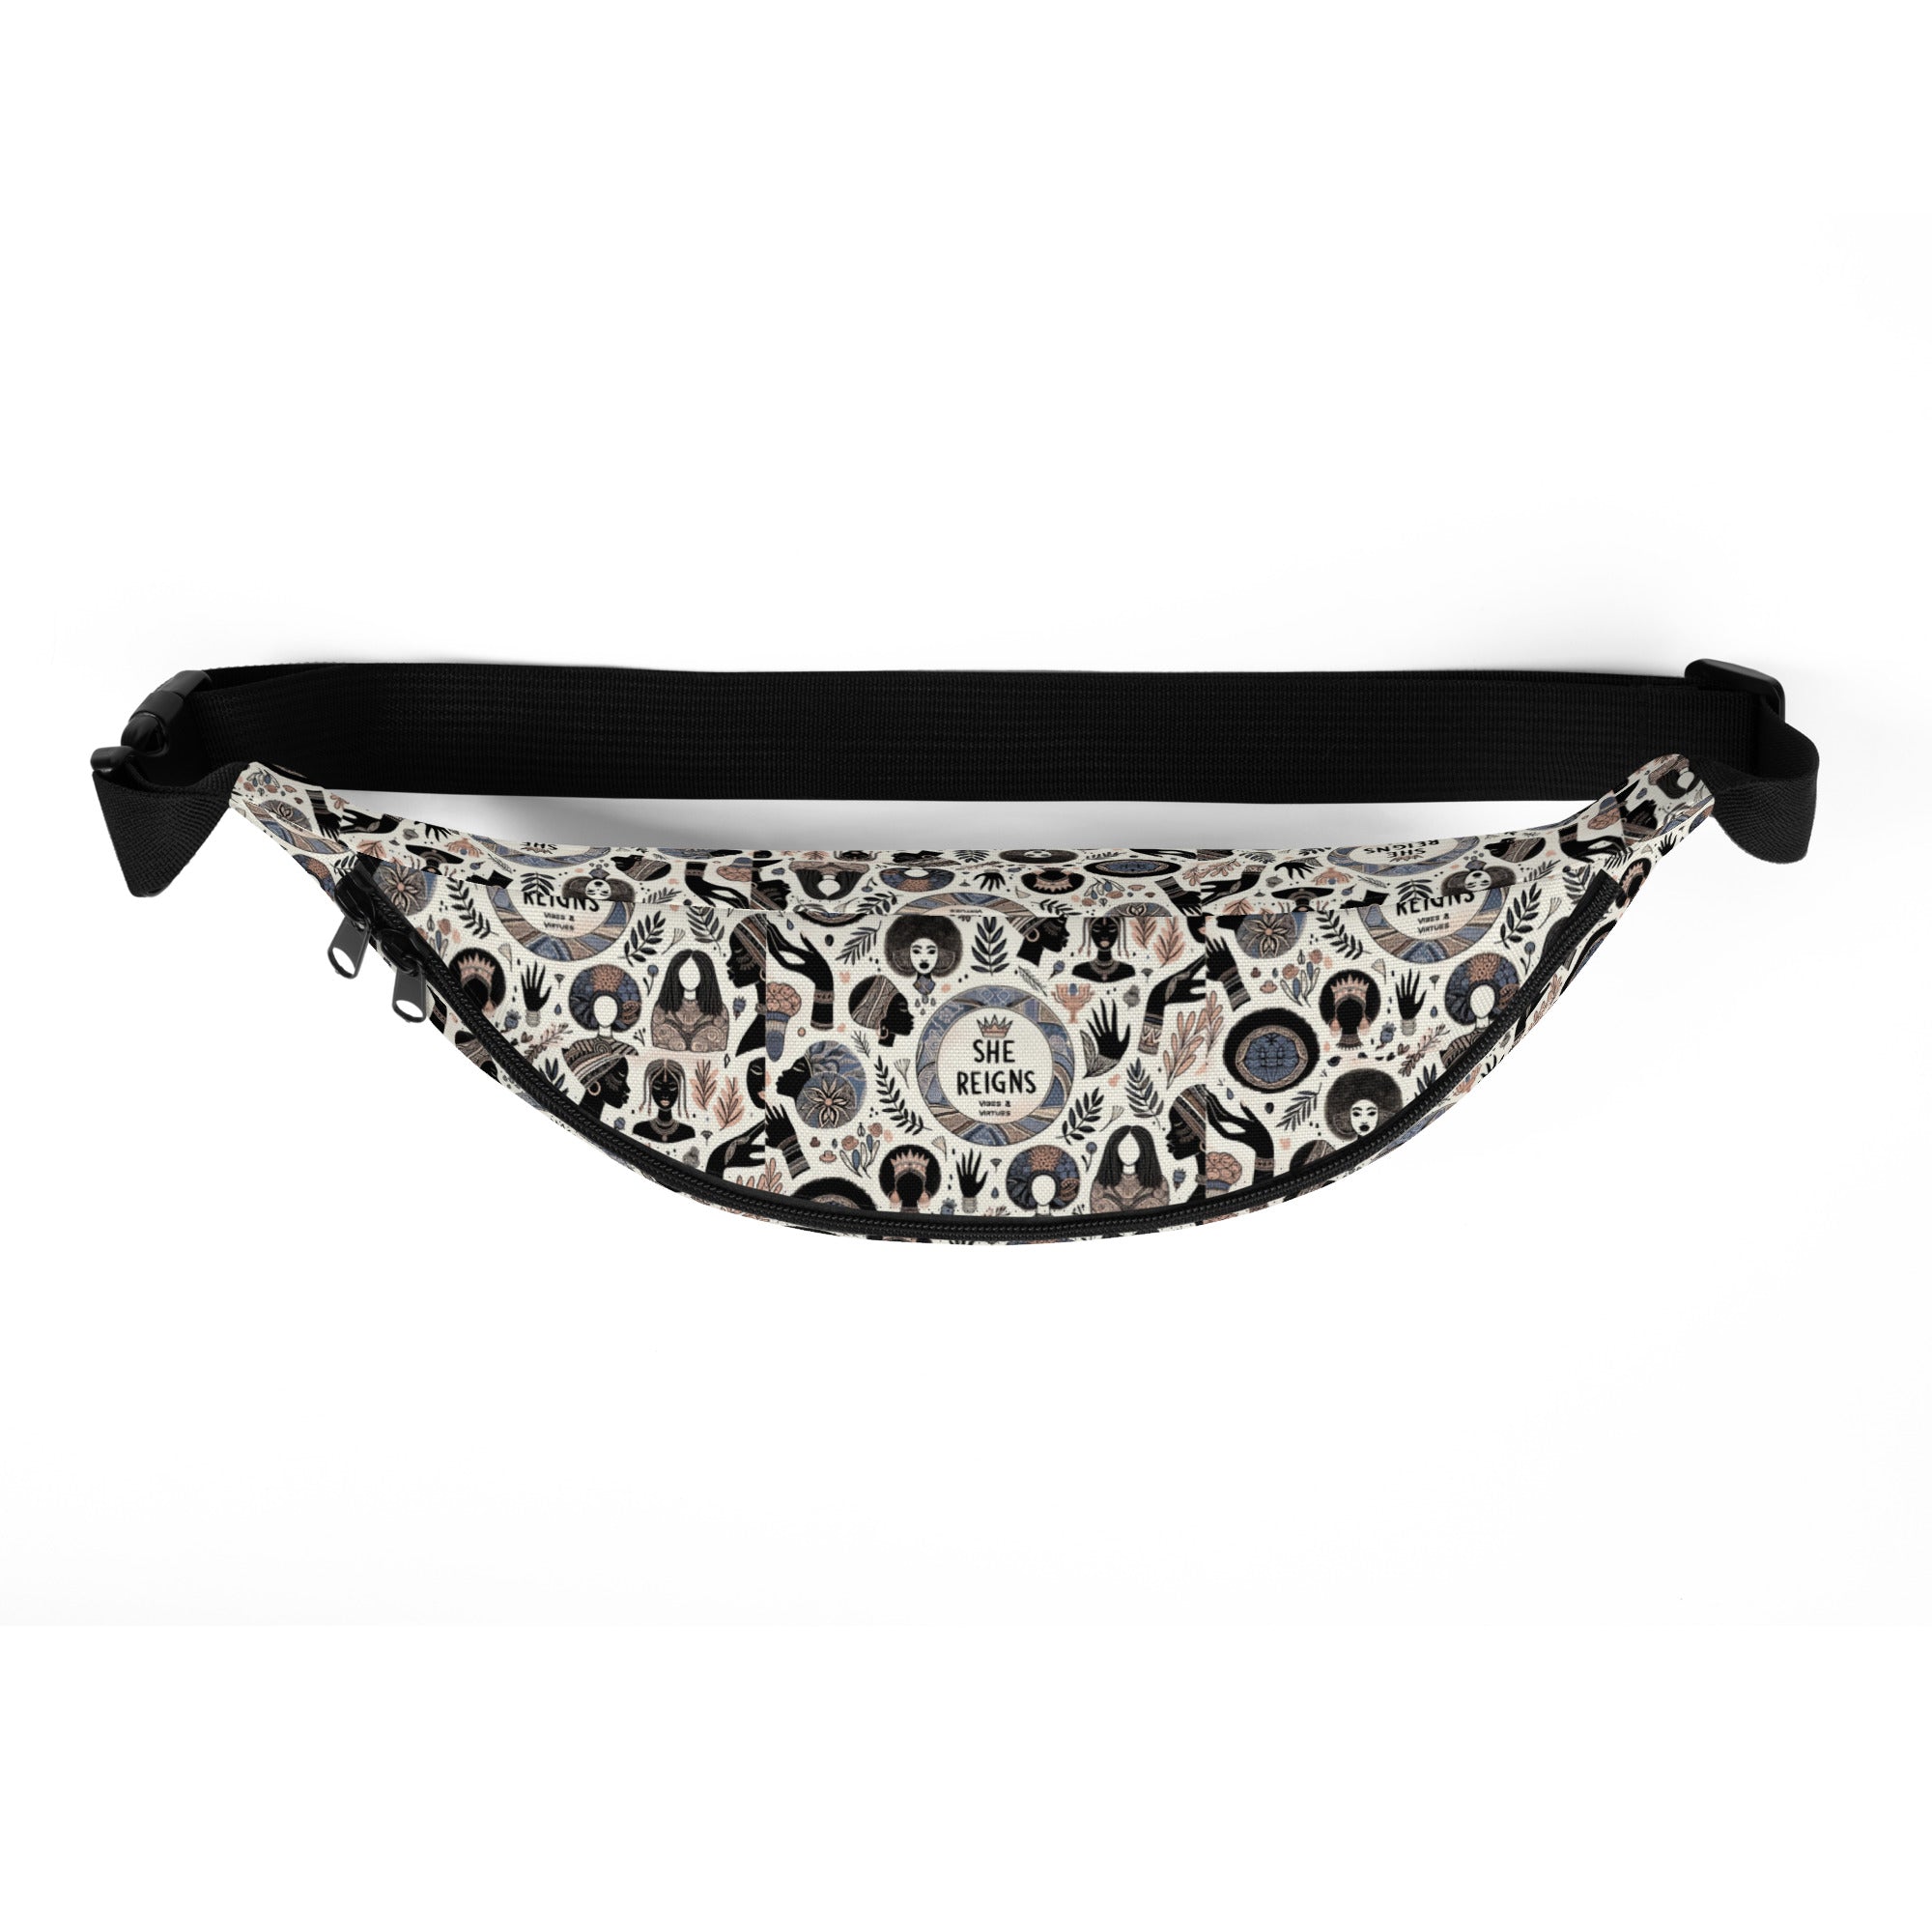 EmpowHER Fanny Pack